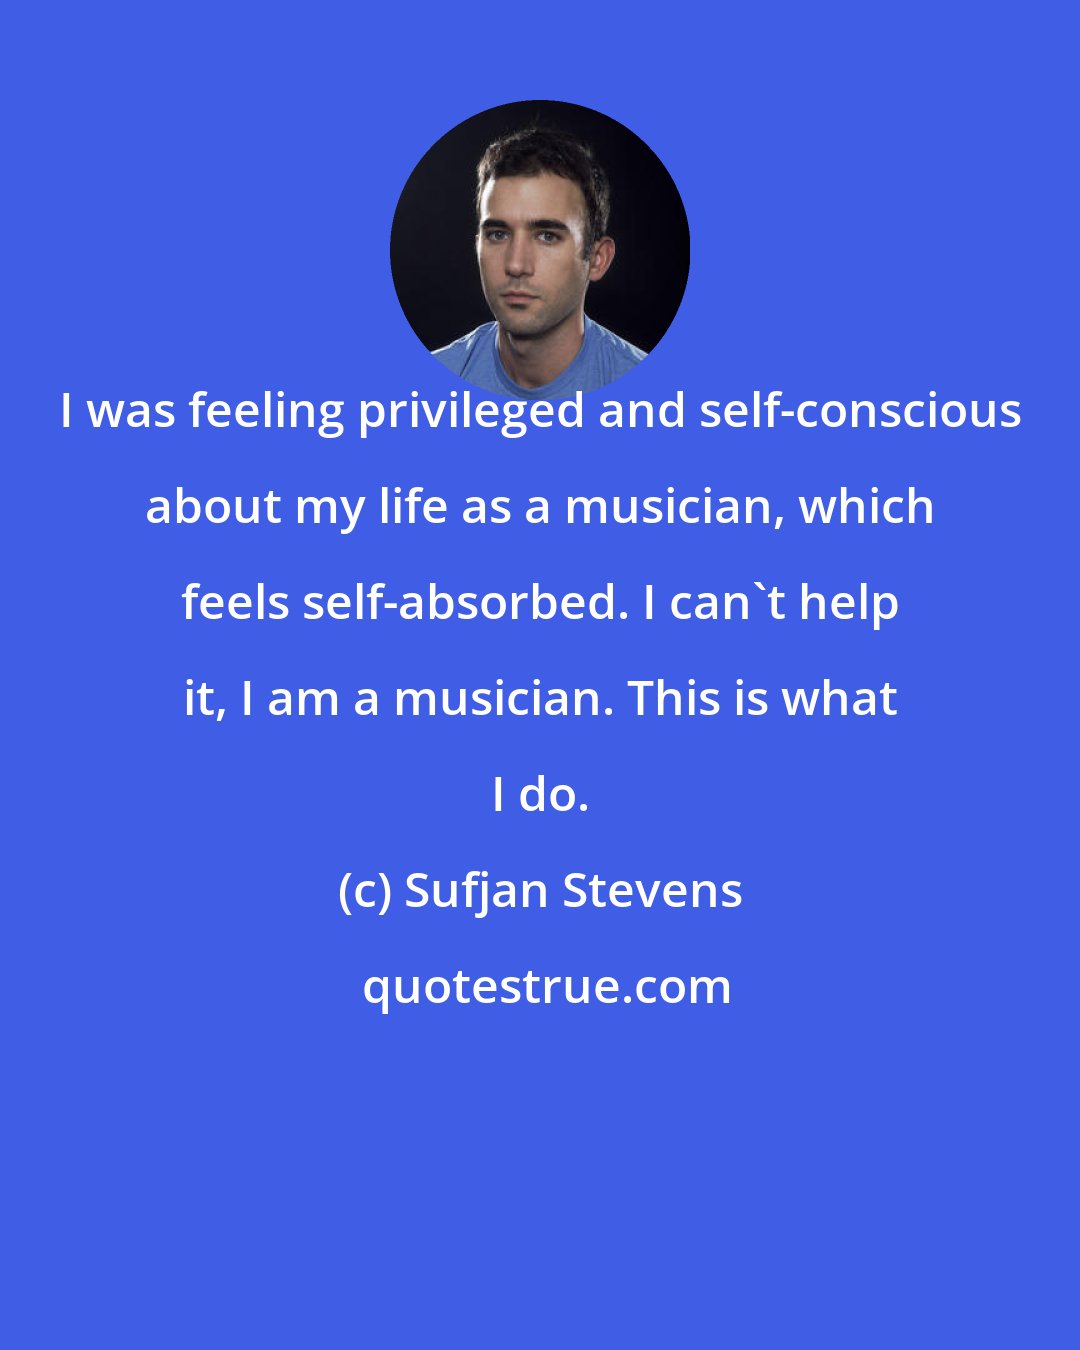 Sufjan Stevens: I was feeling privileged and self-conscious about my life as a musician, which feels self-absorbed. I can't help it, I am a musician. This is what I do.